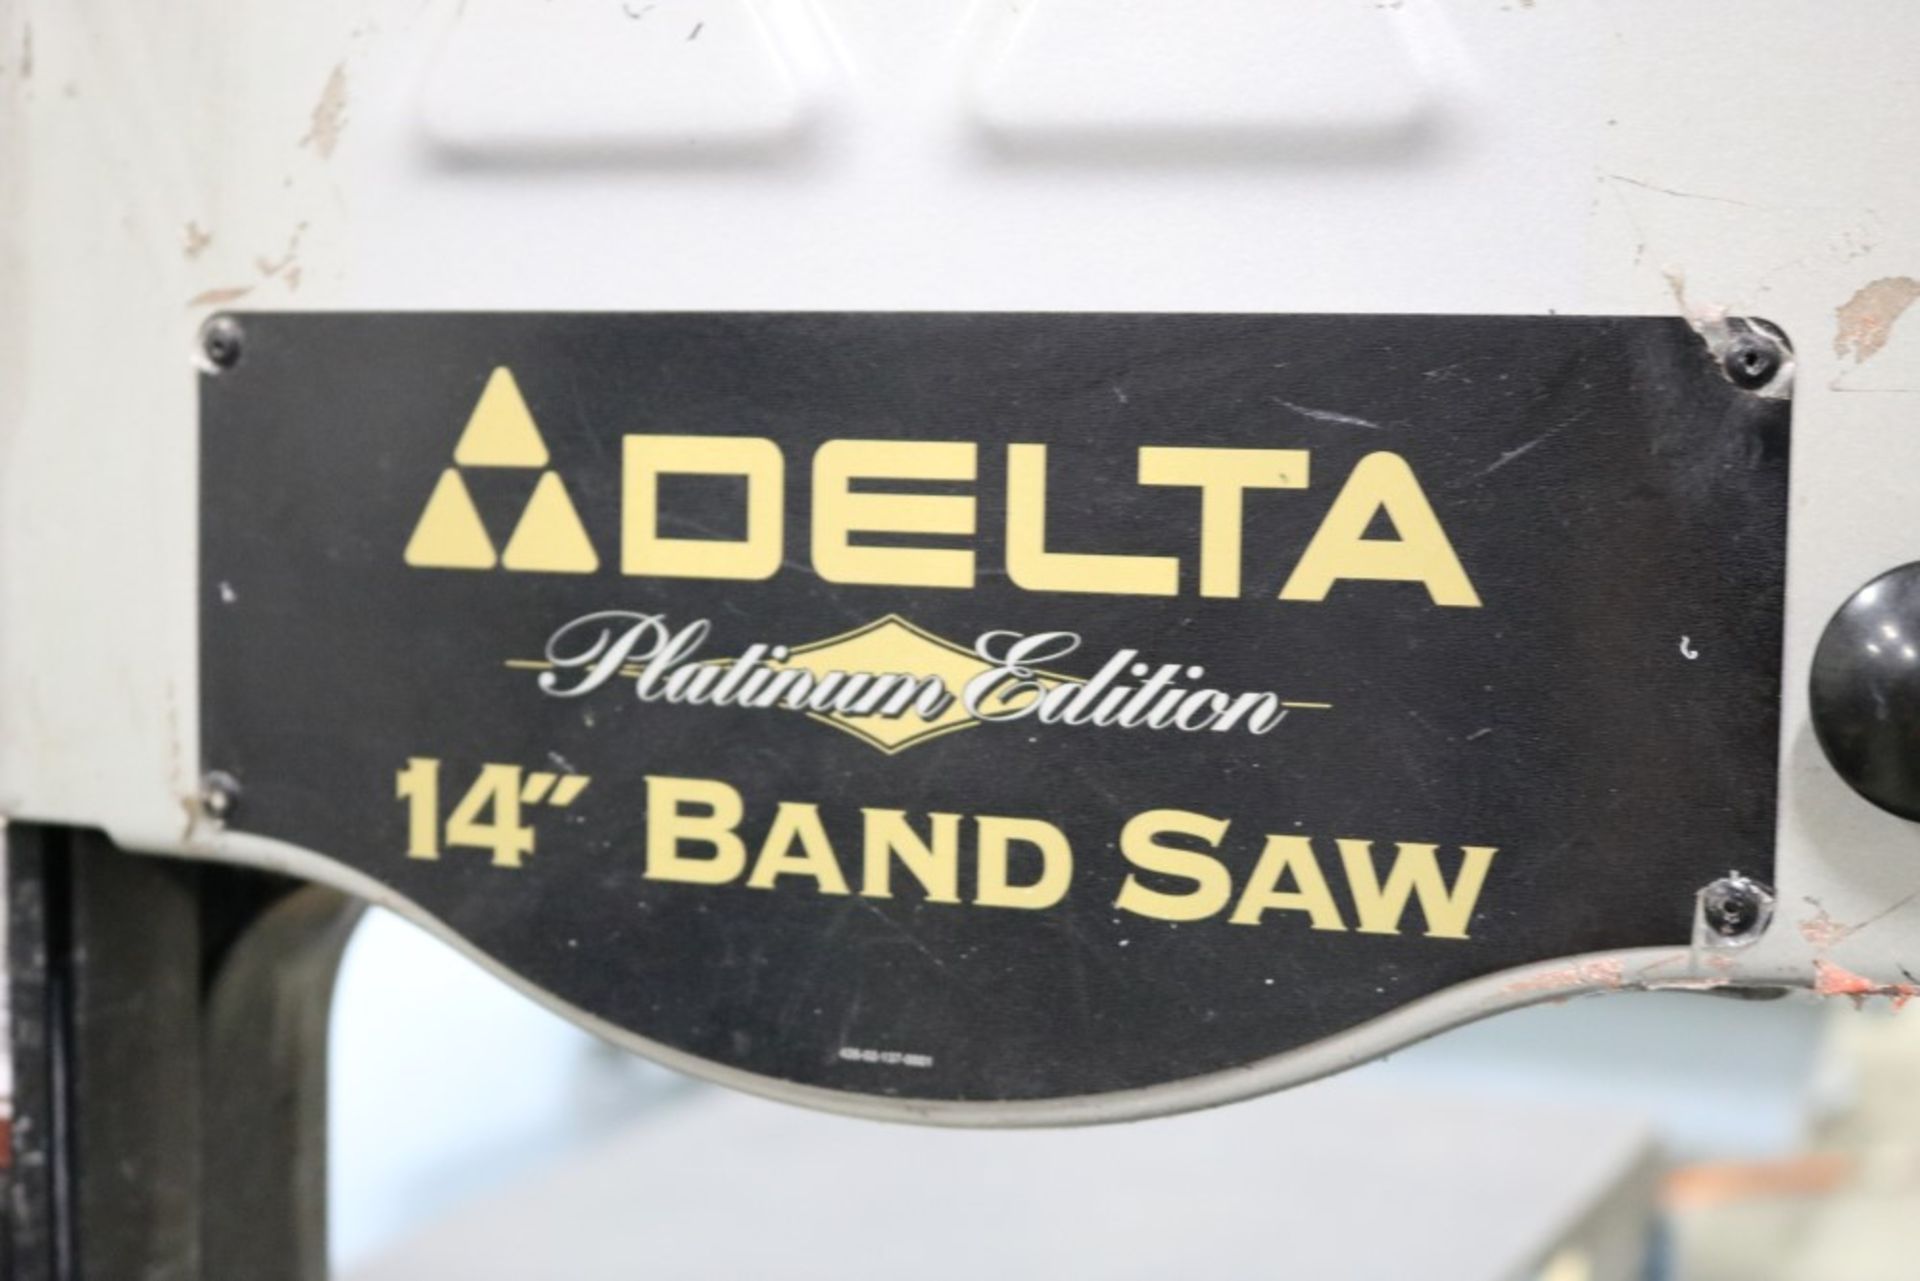 Delta 14" Vertical Band Saw, Cat No 28-254 - Image 3 of 8